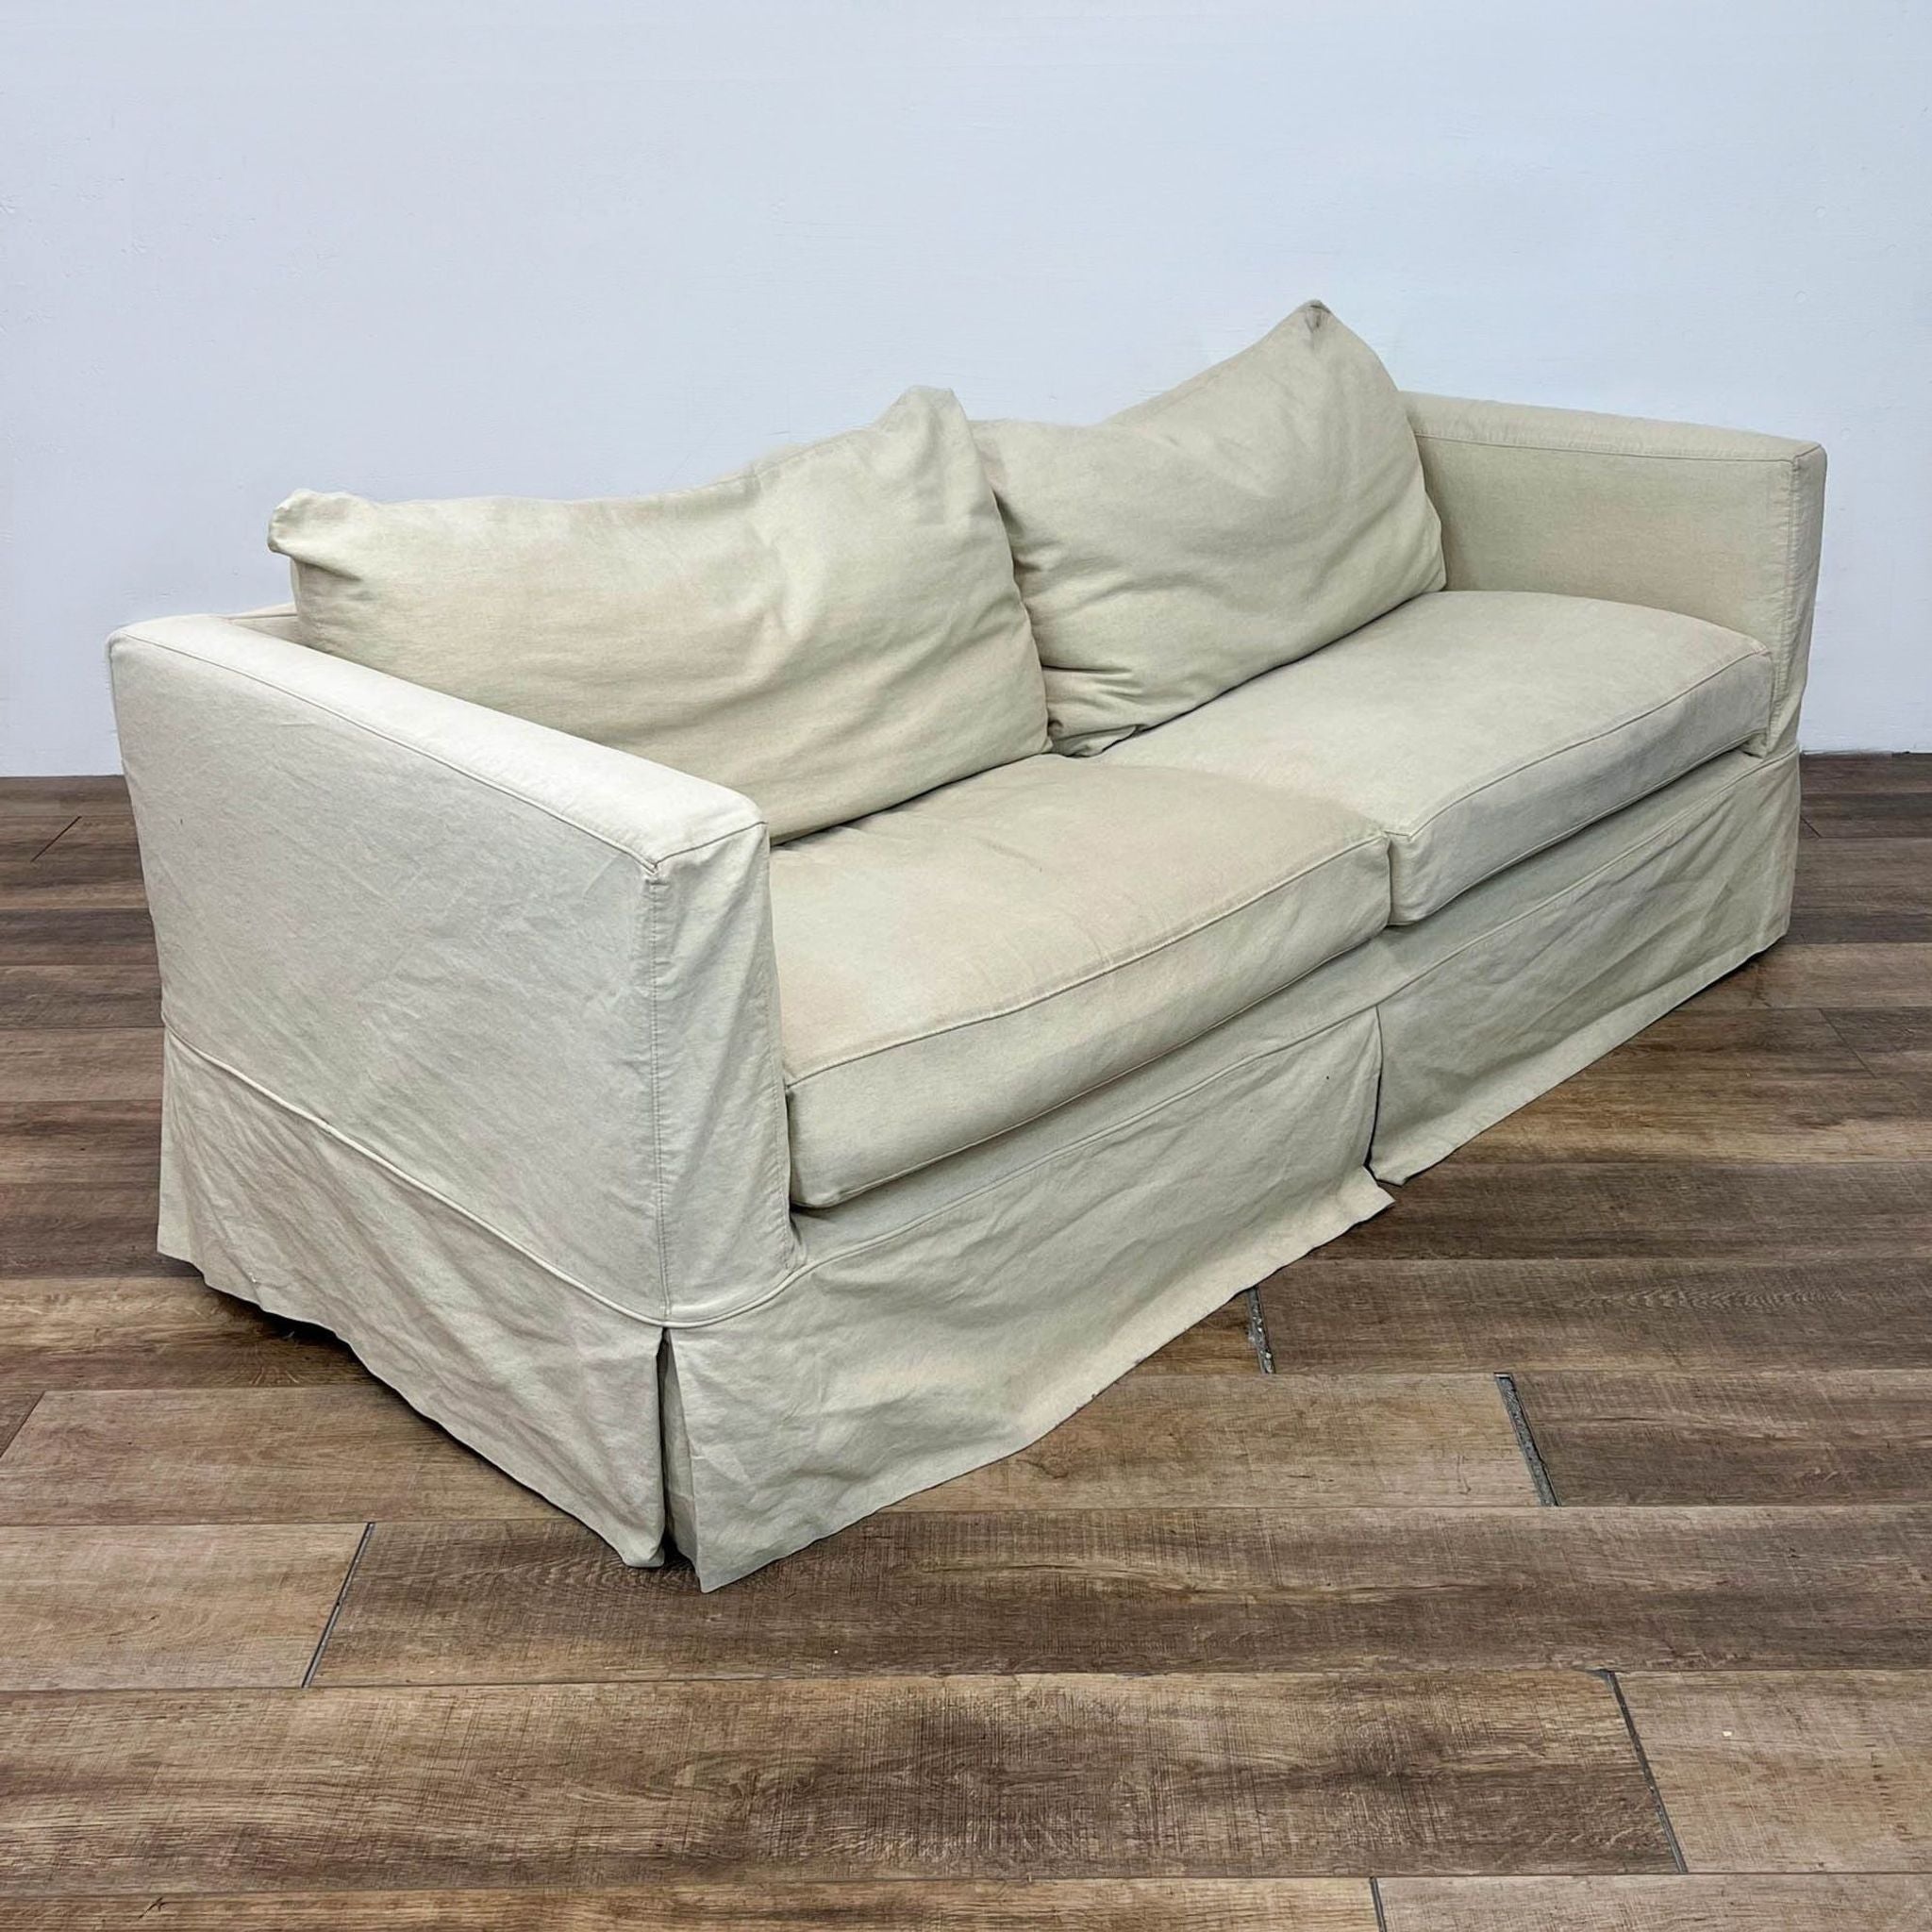 Angled view of beige Canvas 3-seat sofa with shabby chic style and track arms by Crate & Barrel in a room with wooden flooring.